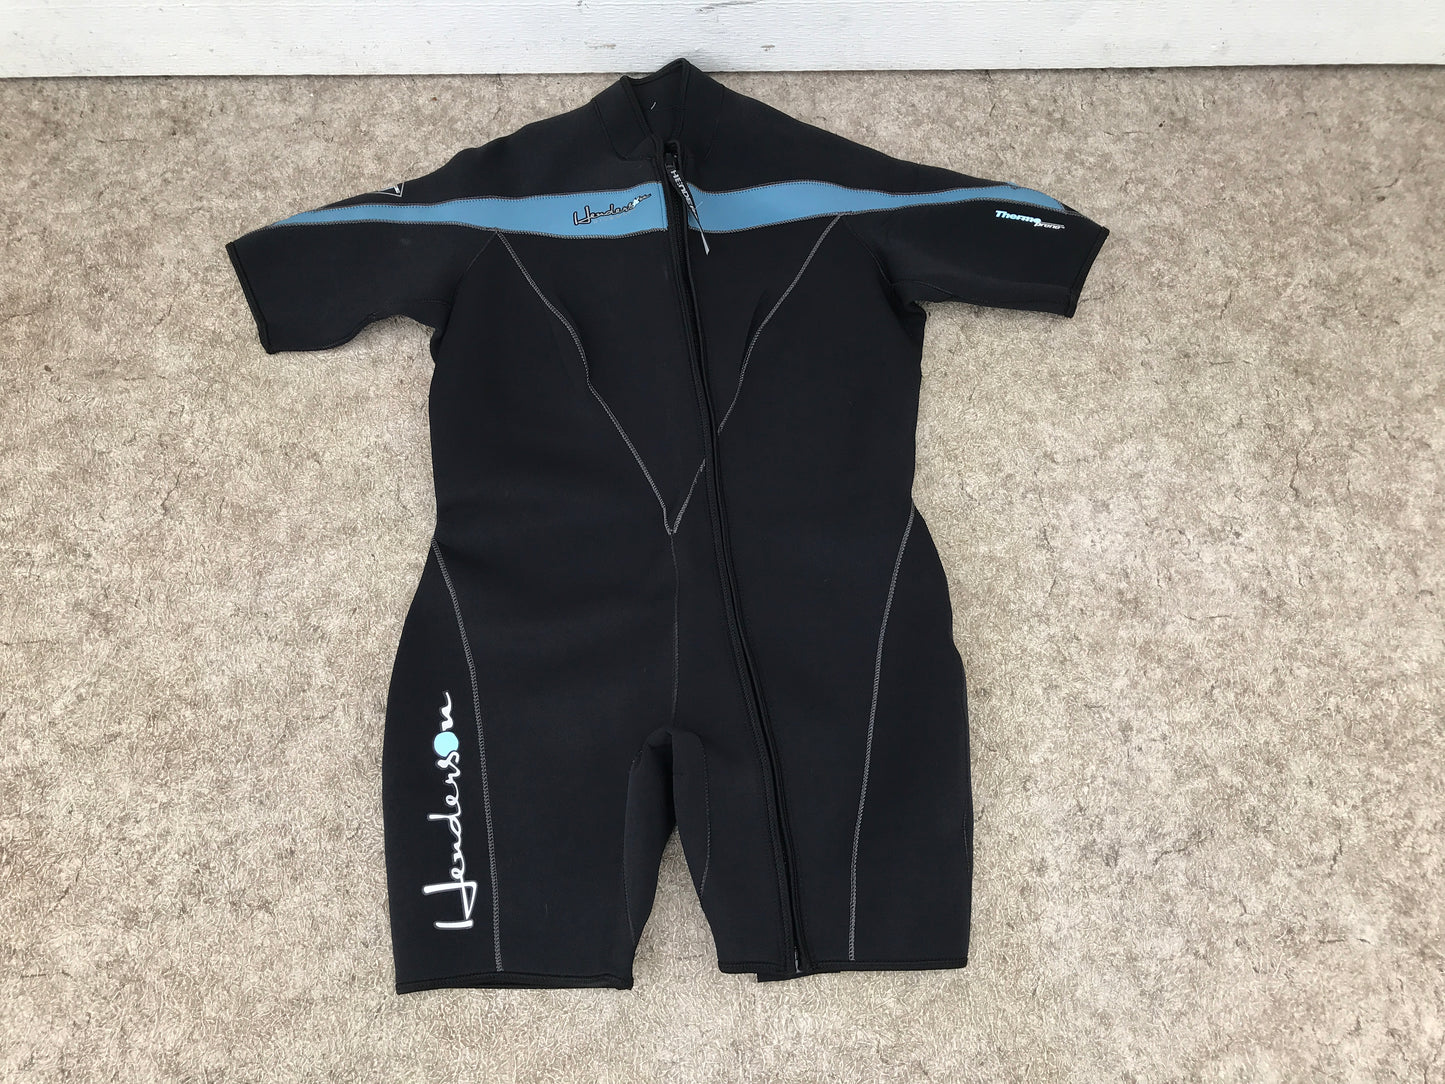 Wetsuit Men's Size XX Large Henderson With Front Zip Up 3 mm Neoprene Blue Black Like New